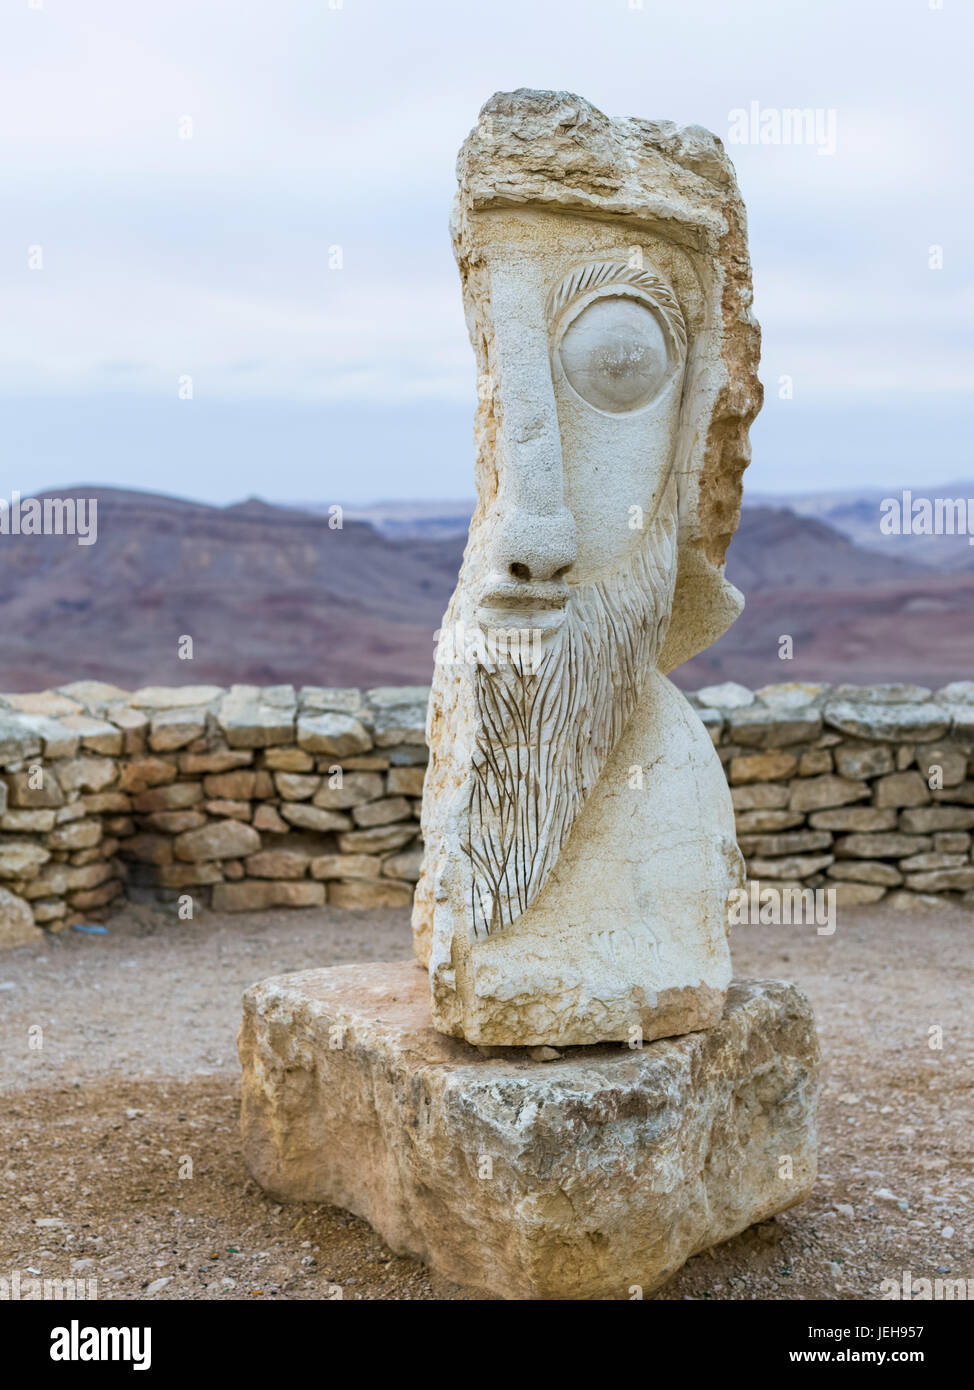 Stone sculpture of a face in male likeness; Mitzpe Ramon, South District, Israel Stock Photo